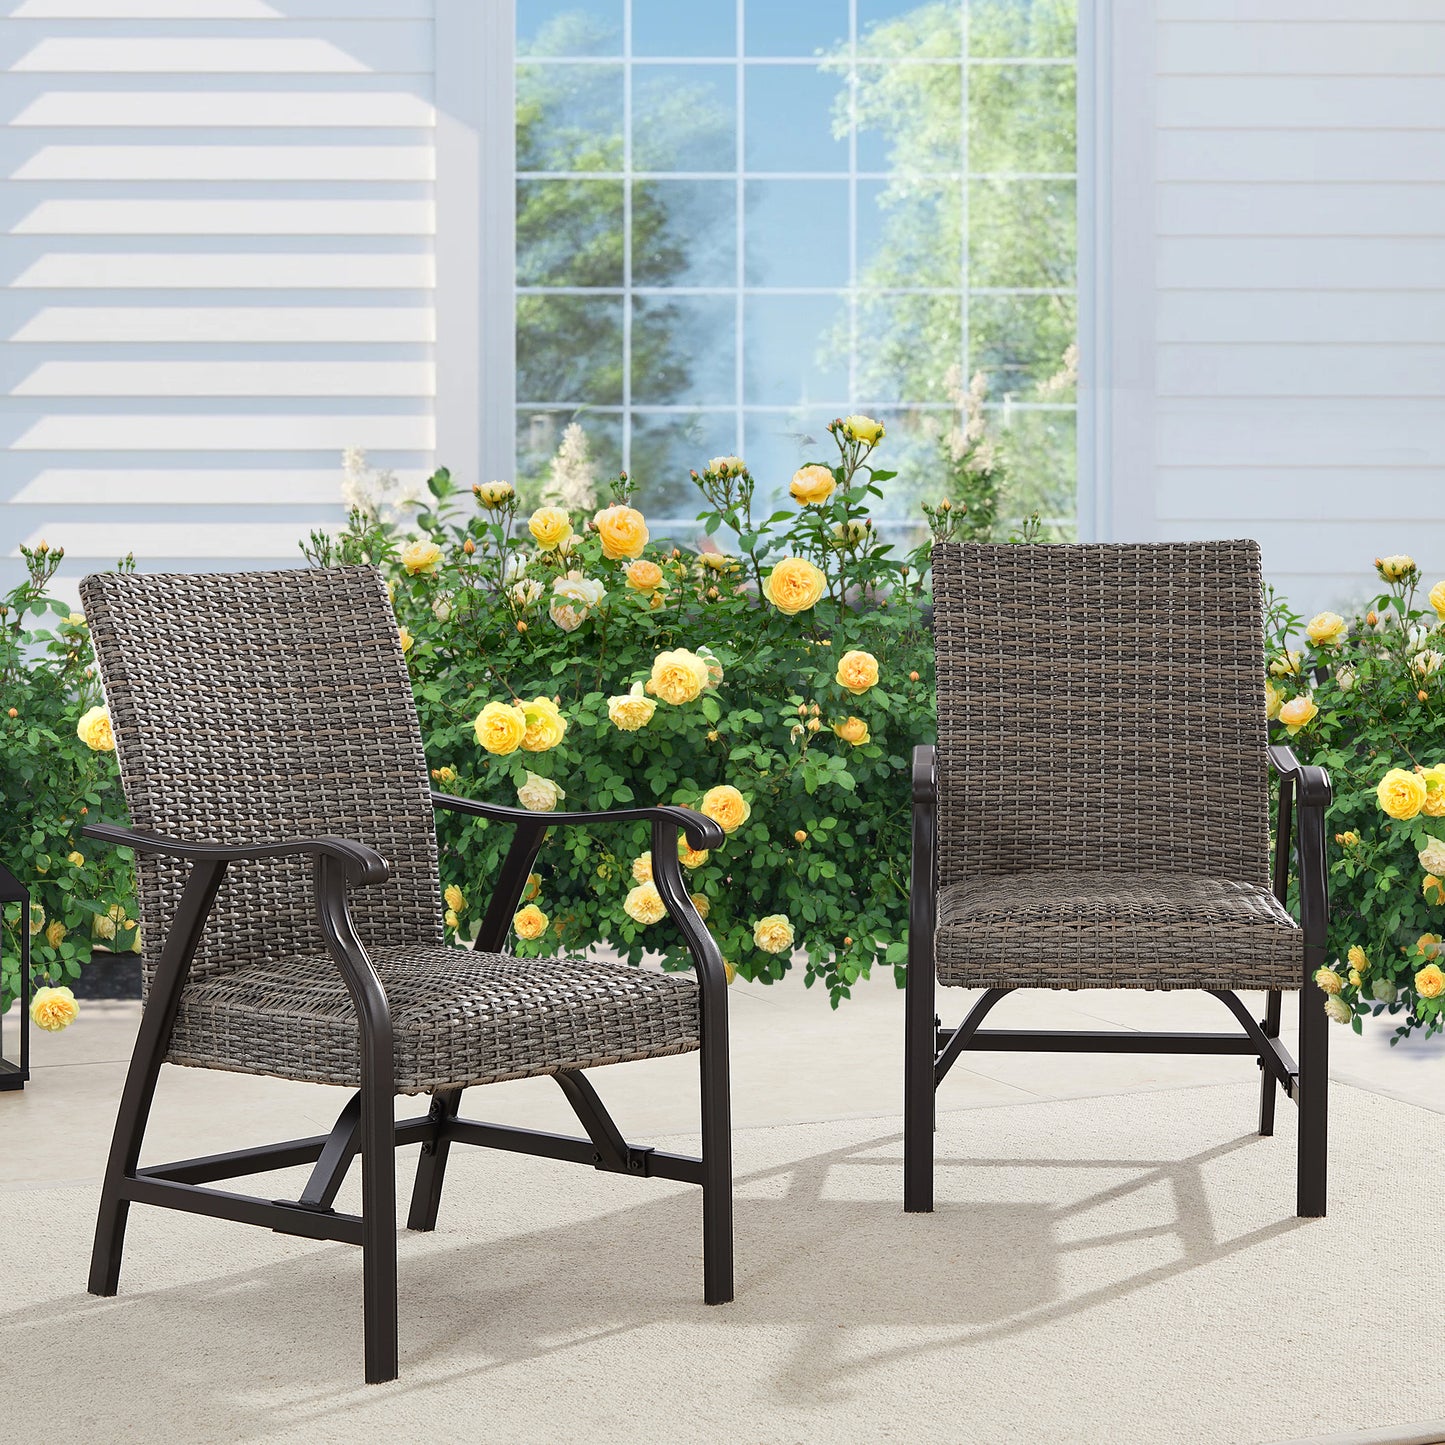 Patio Metal Wicker Motion Rocking Chairs ( Set of 2 )